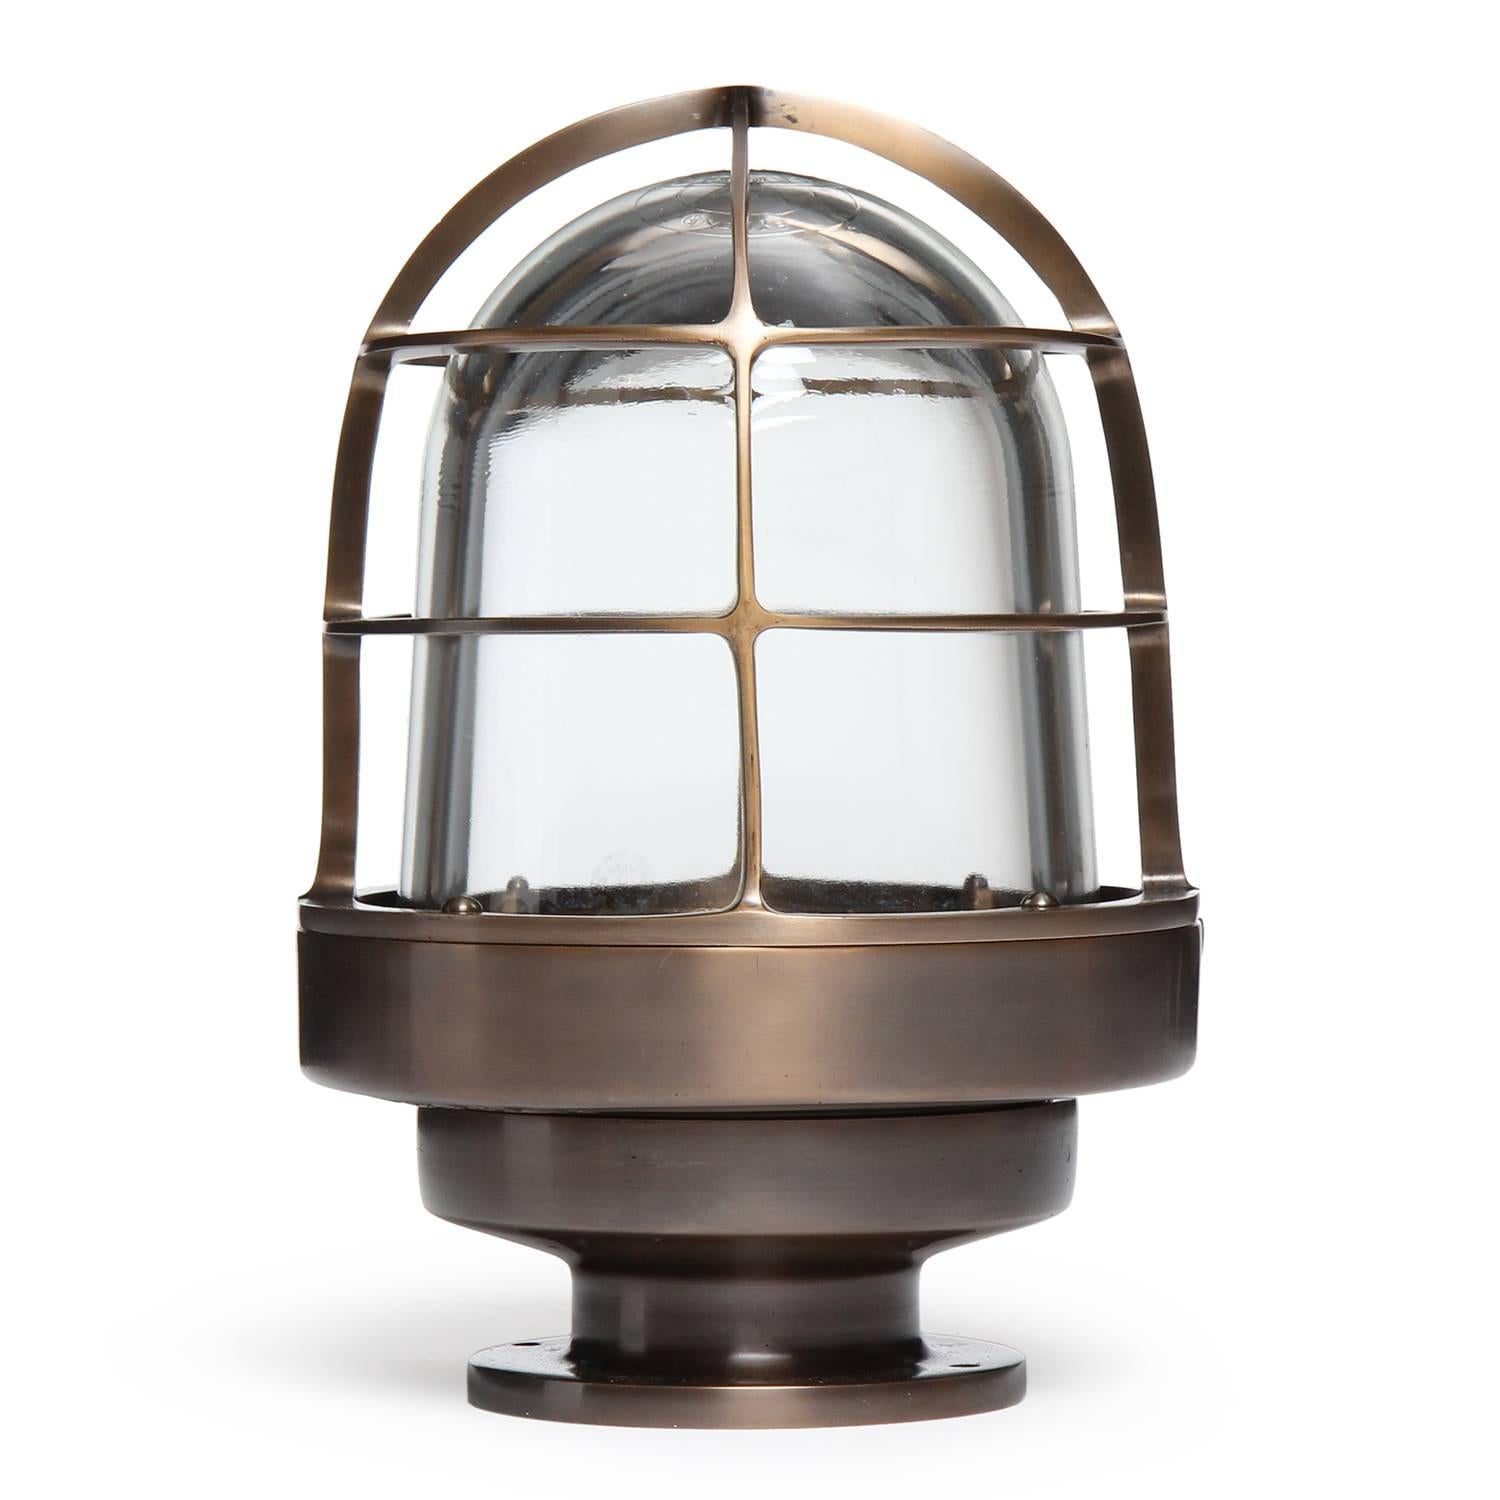 A substantial domed caged flush mount industrial bronze light fixture having a warm patina and a glass inner dome diffuser.